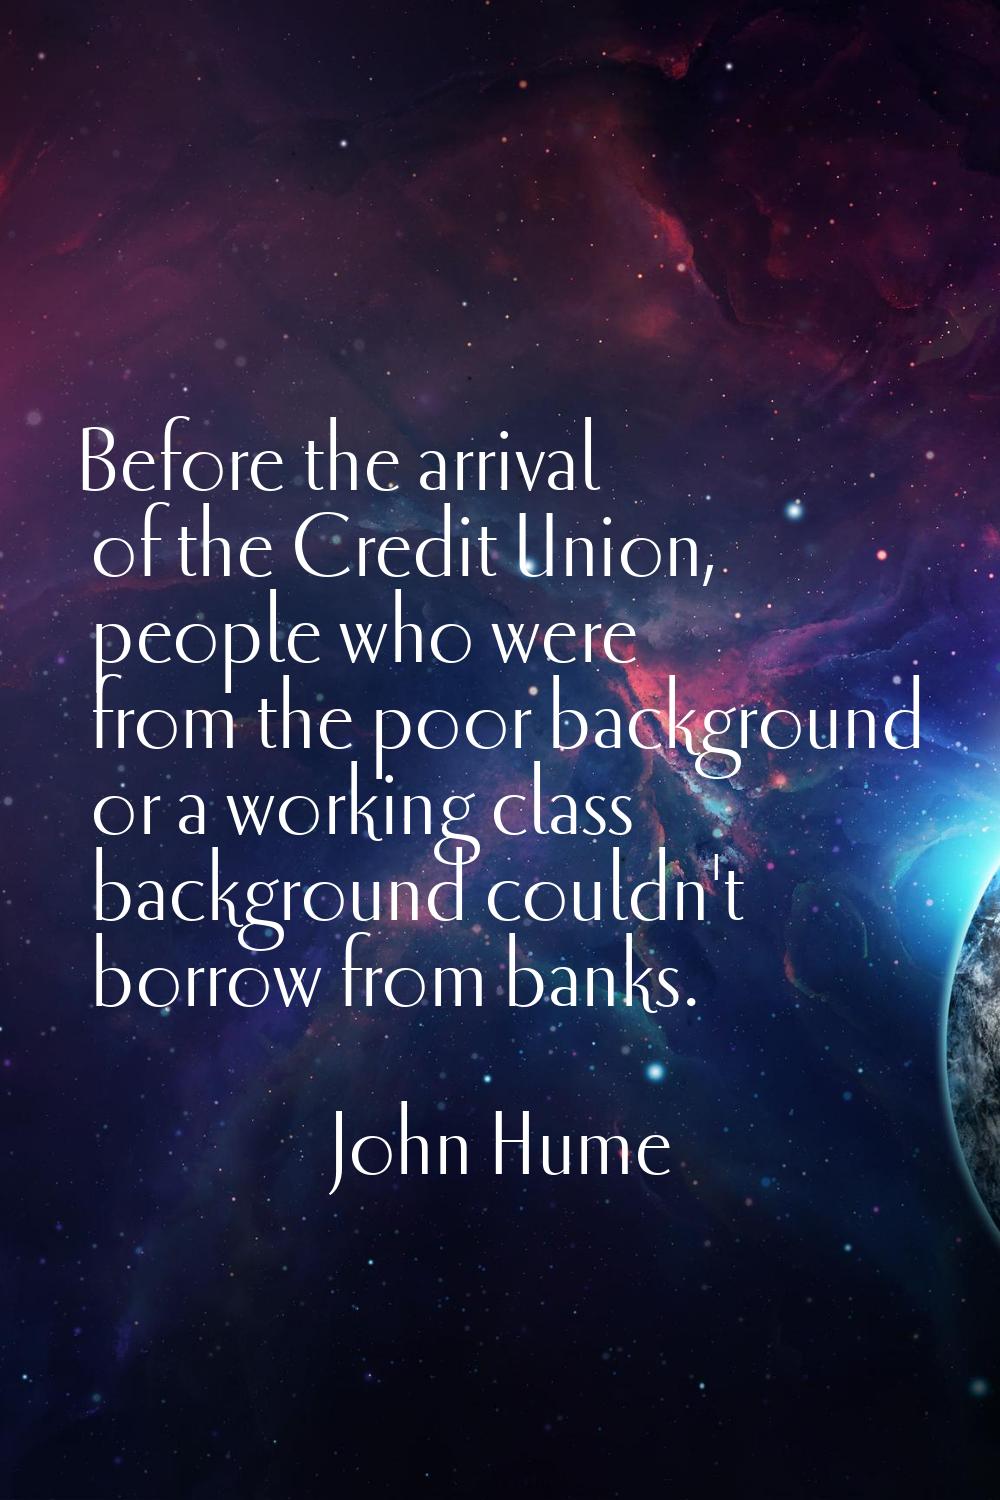 Before the arrival of the Credit Union, people who were from the poor background or a working class